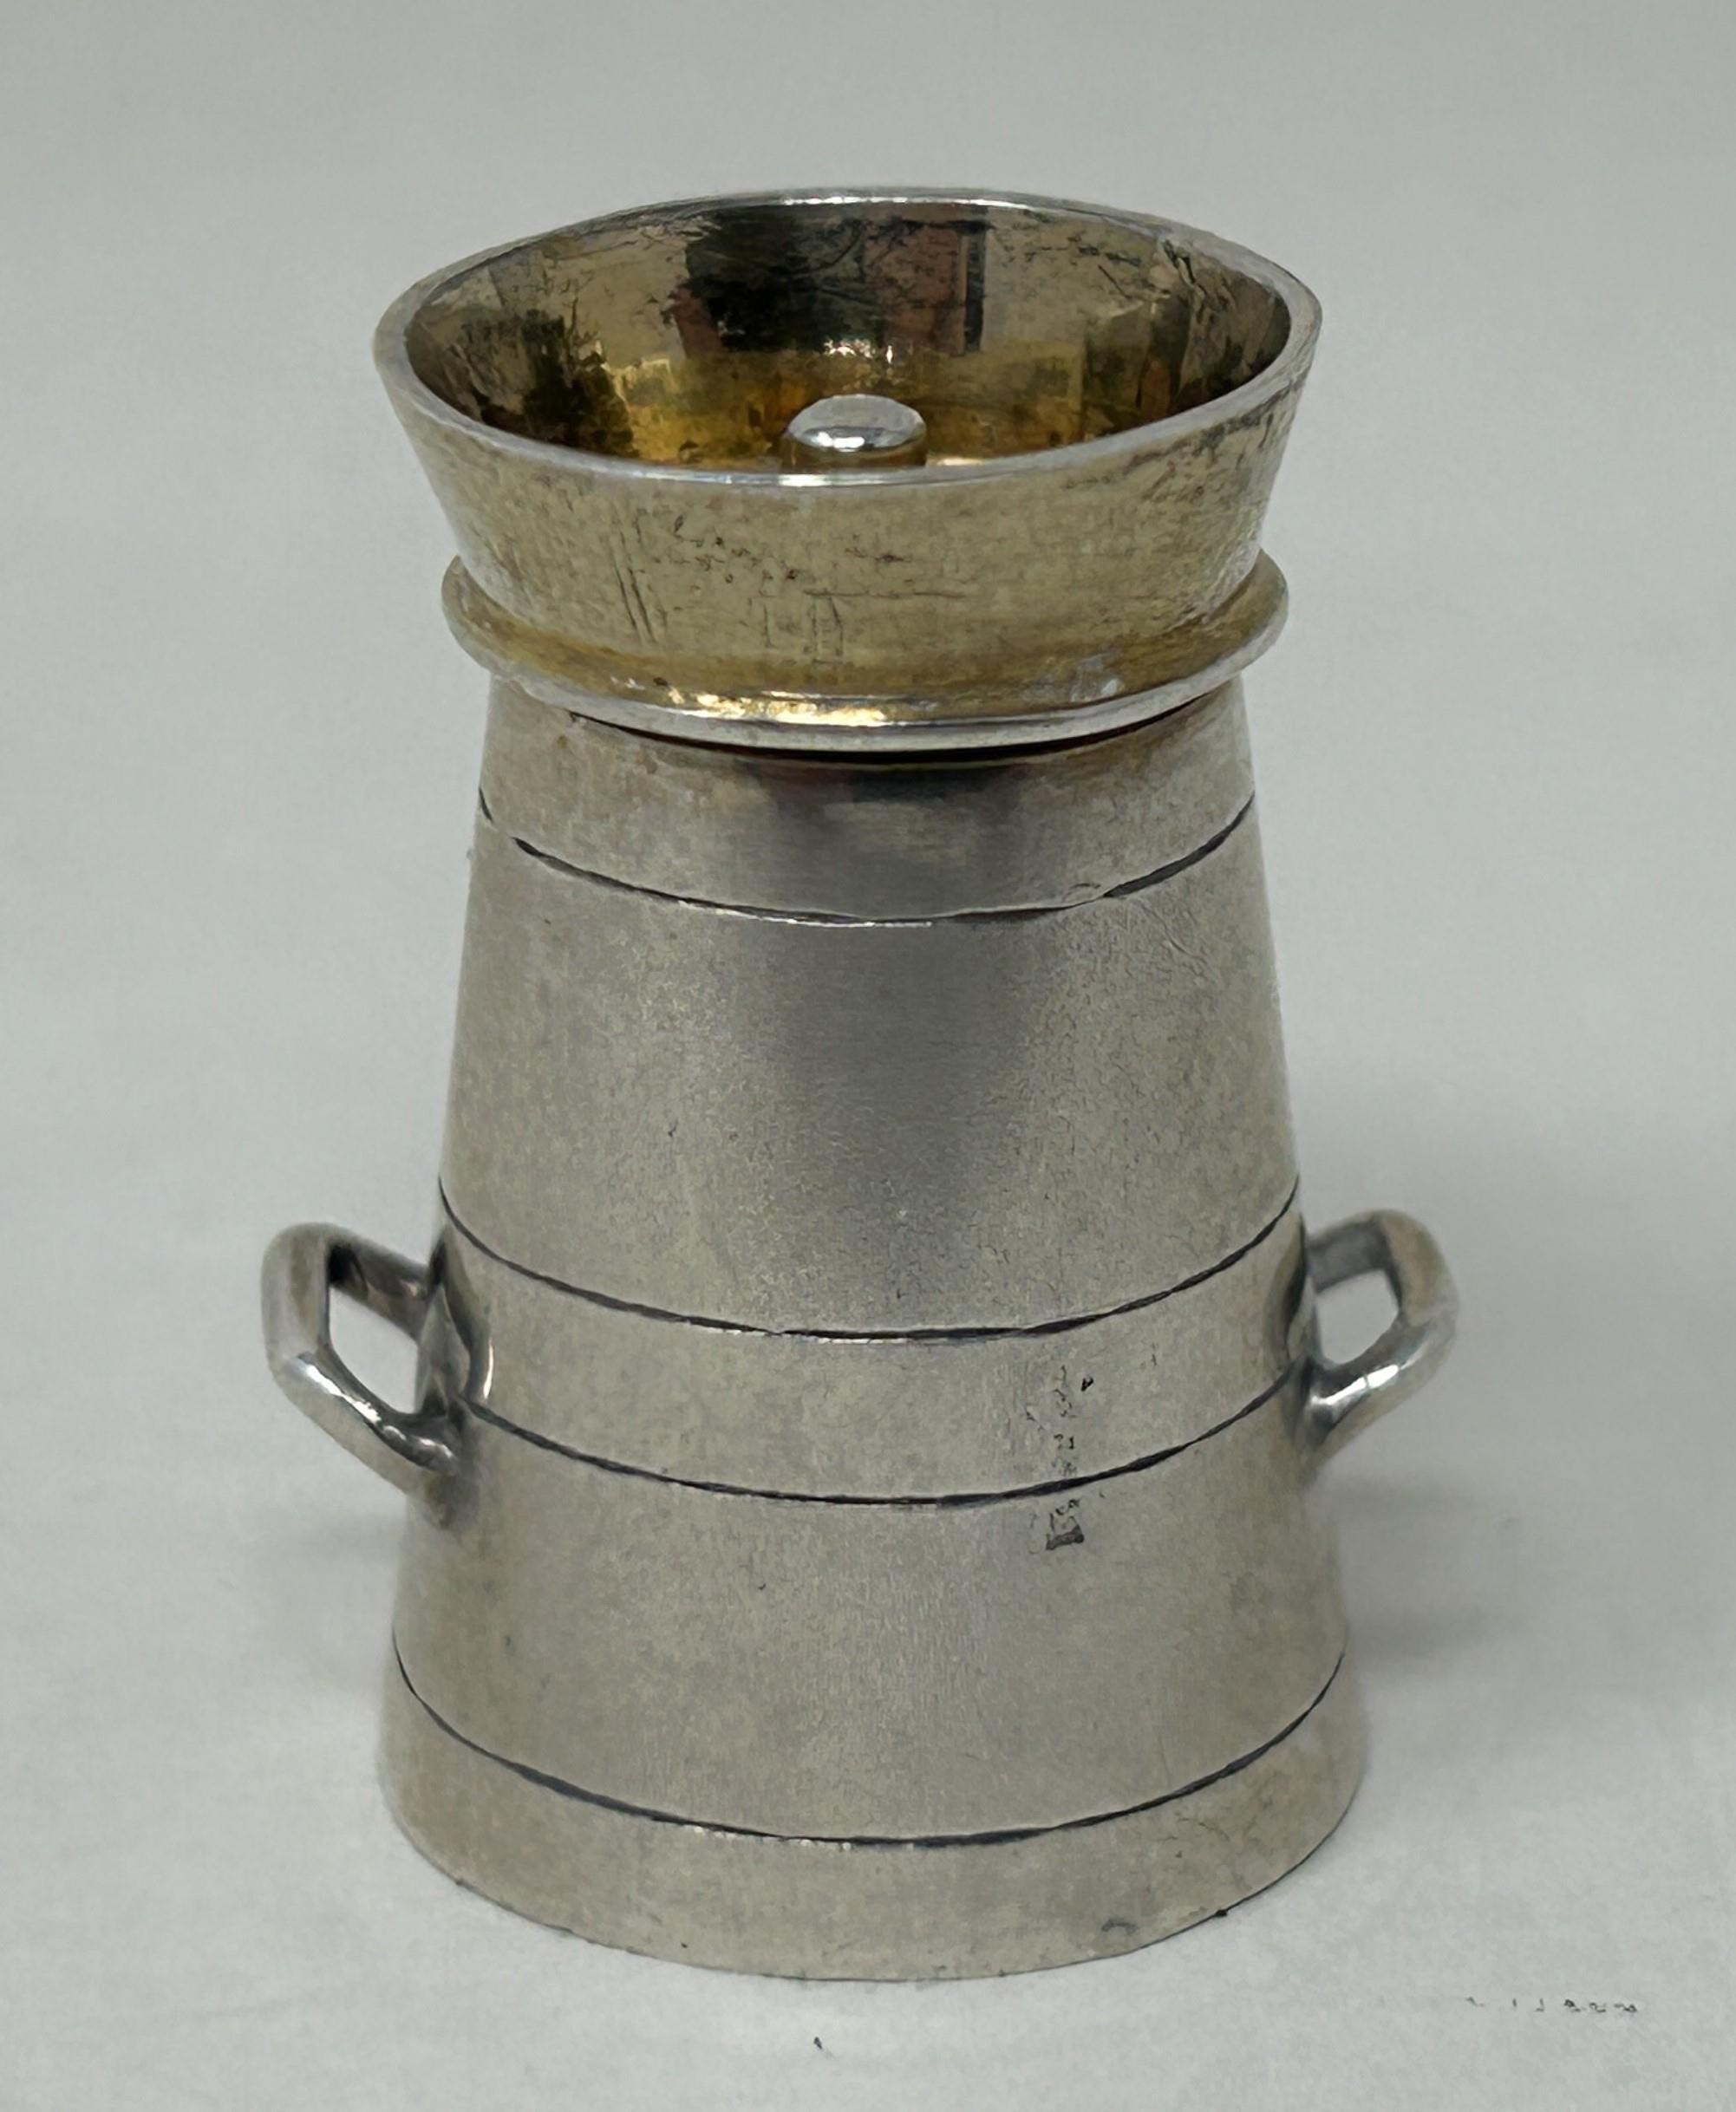 A Victorian silver novelty pepper, in the form of a milk churn, Chester 1877, 6.5 g